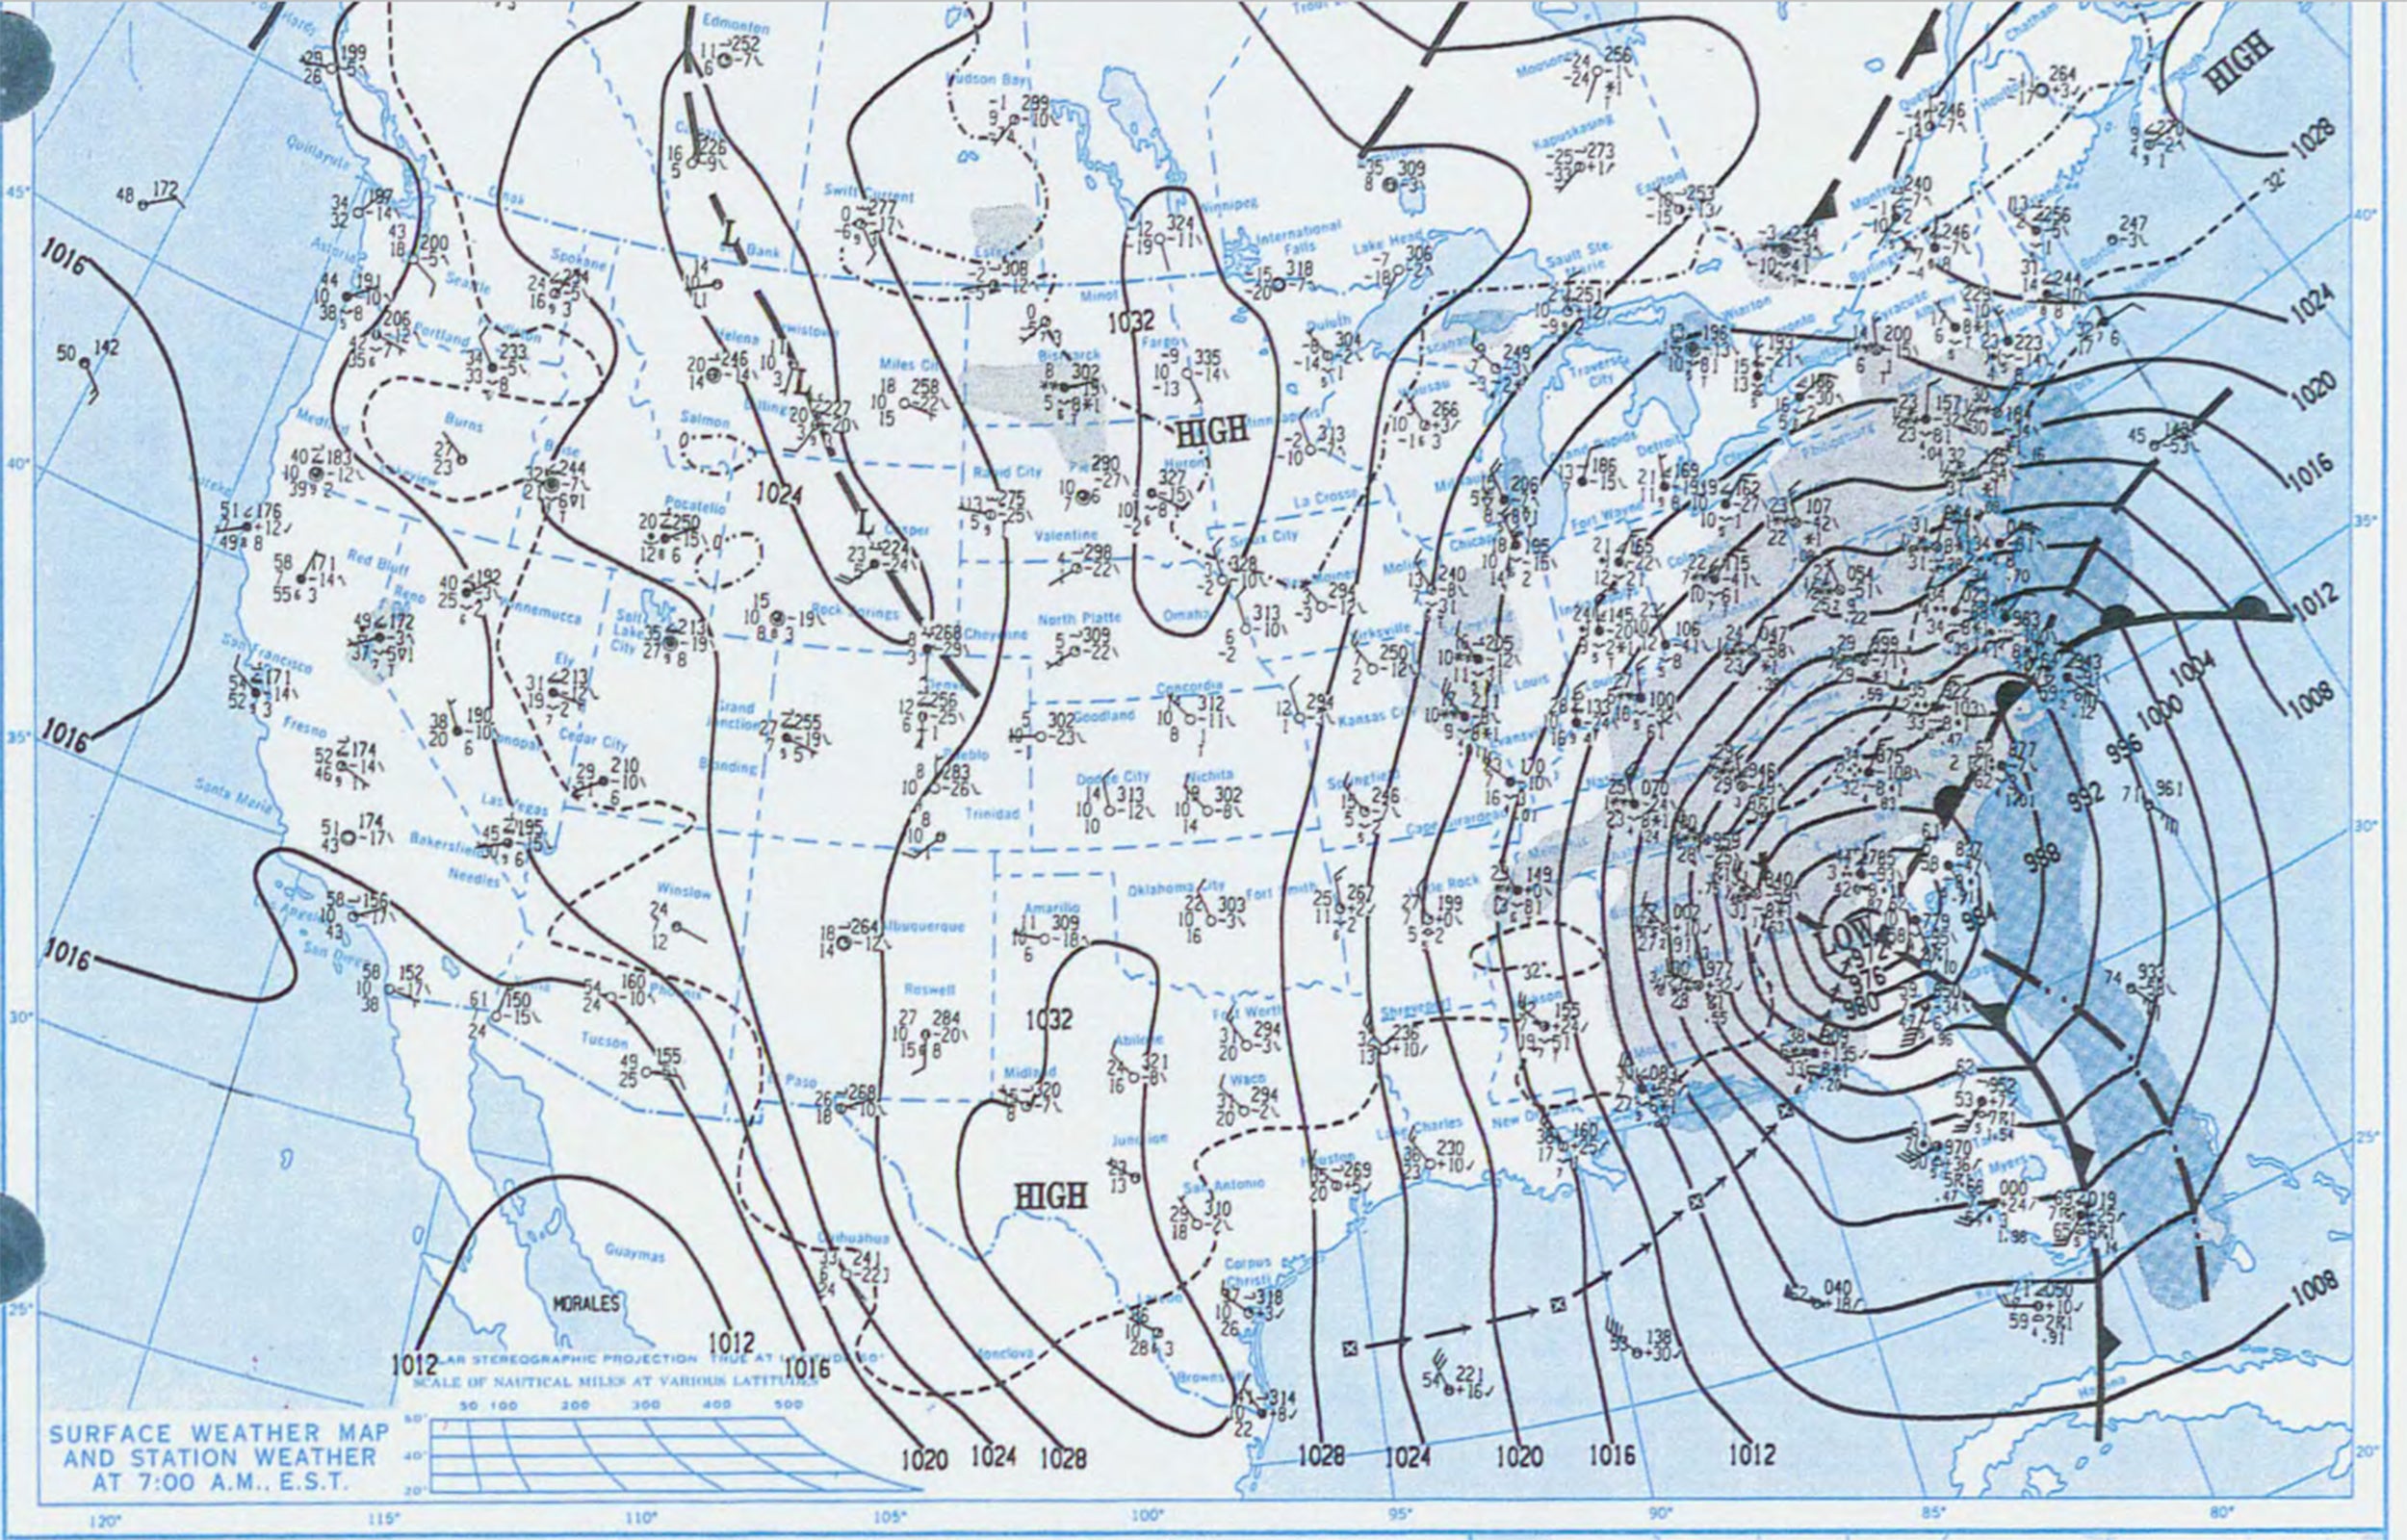 The historic superstorm of March 1993